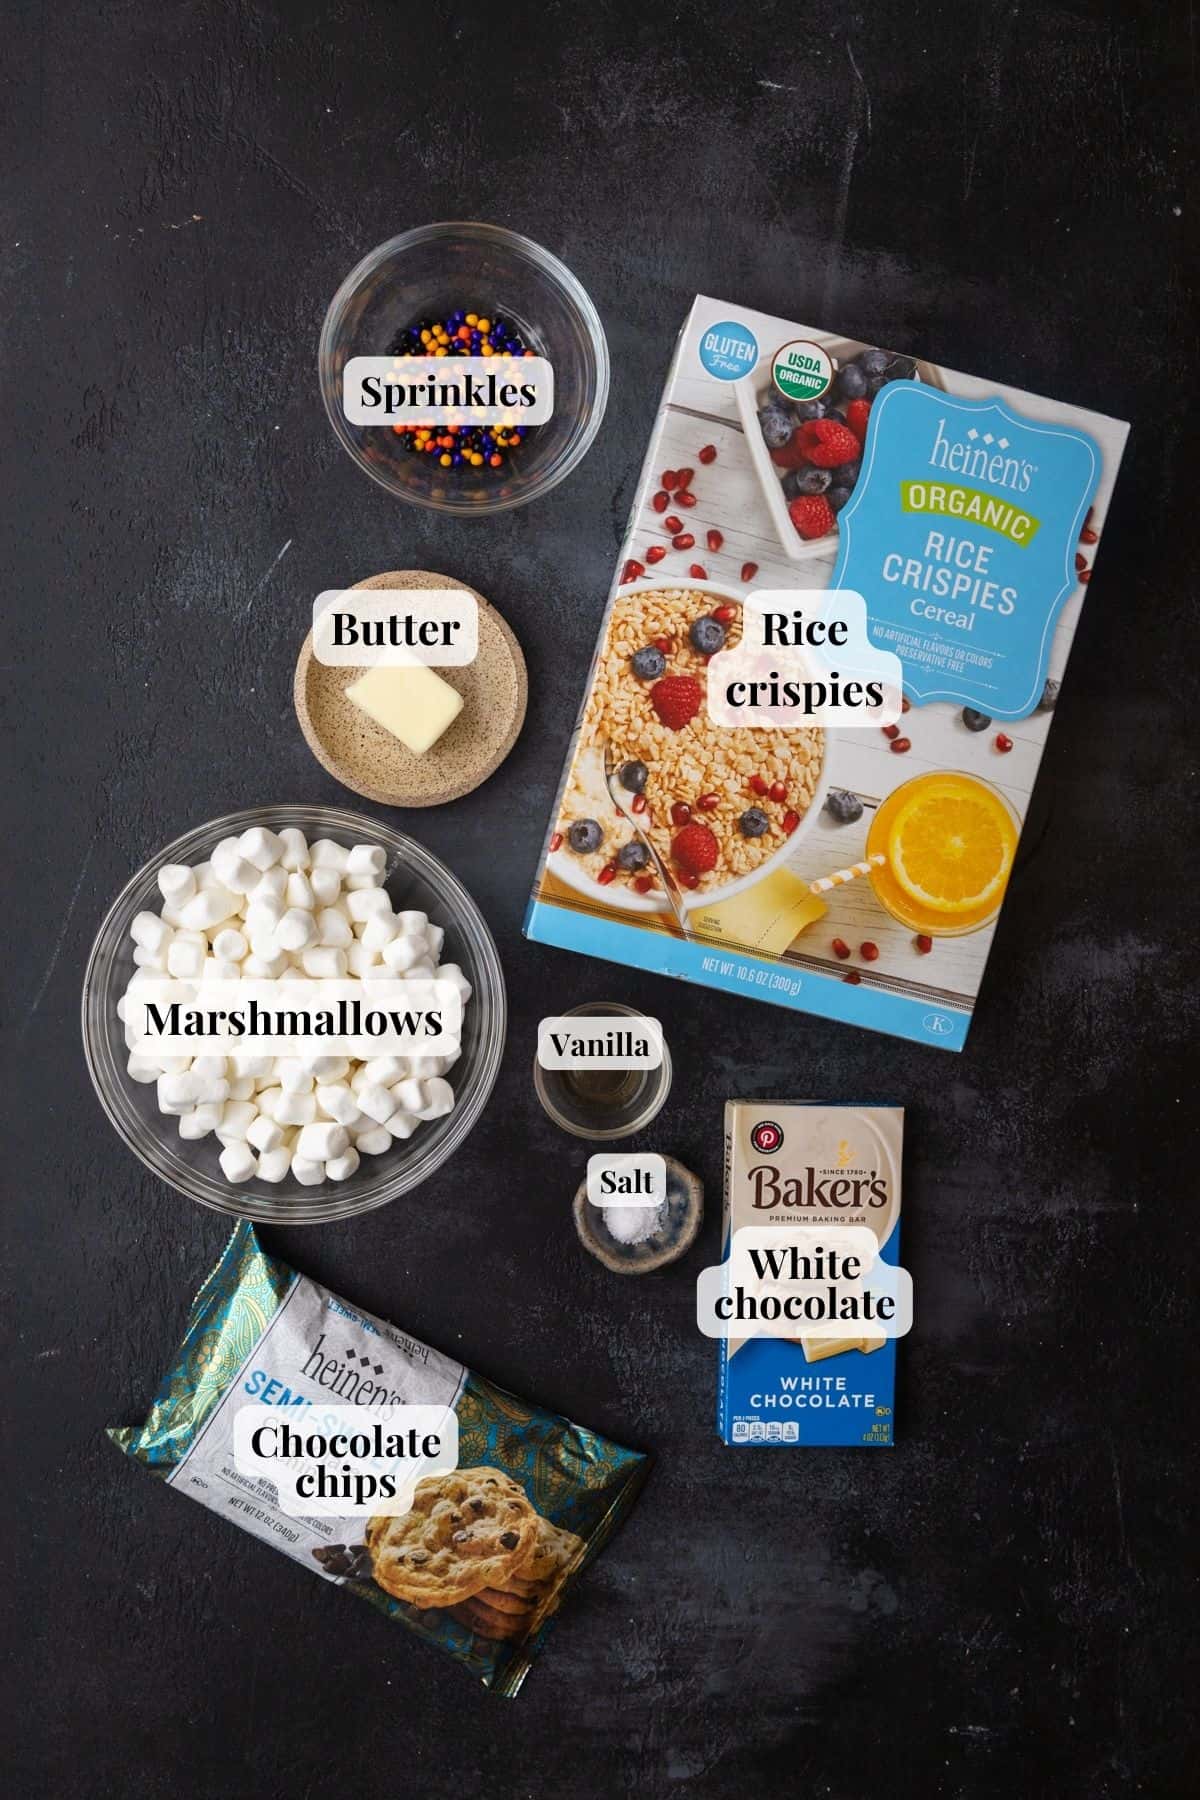 Ingredients to make chocolate dipped Rice Krispie treats on a black surface.